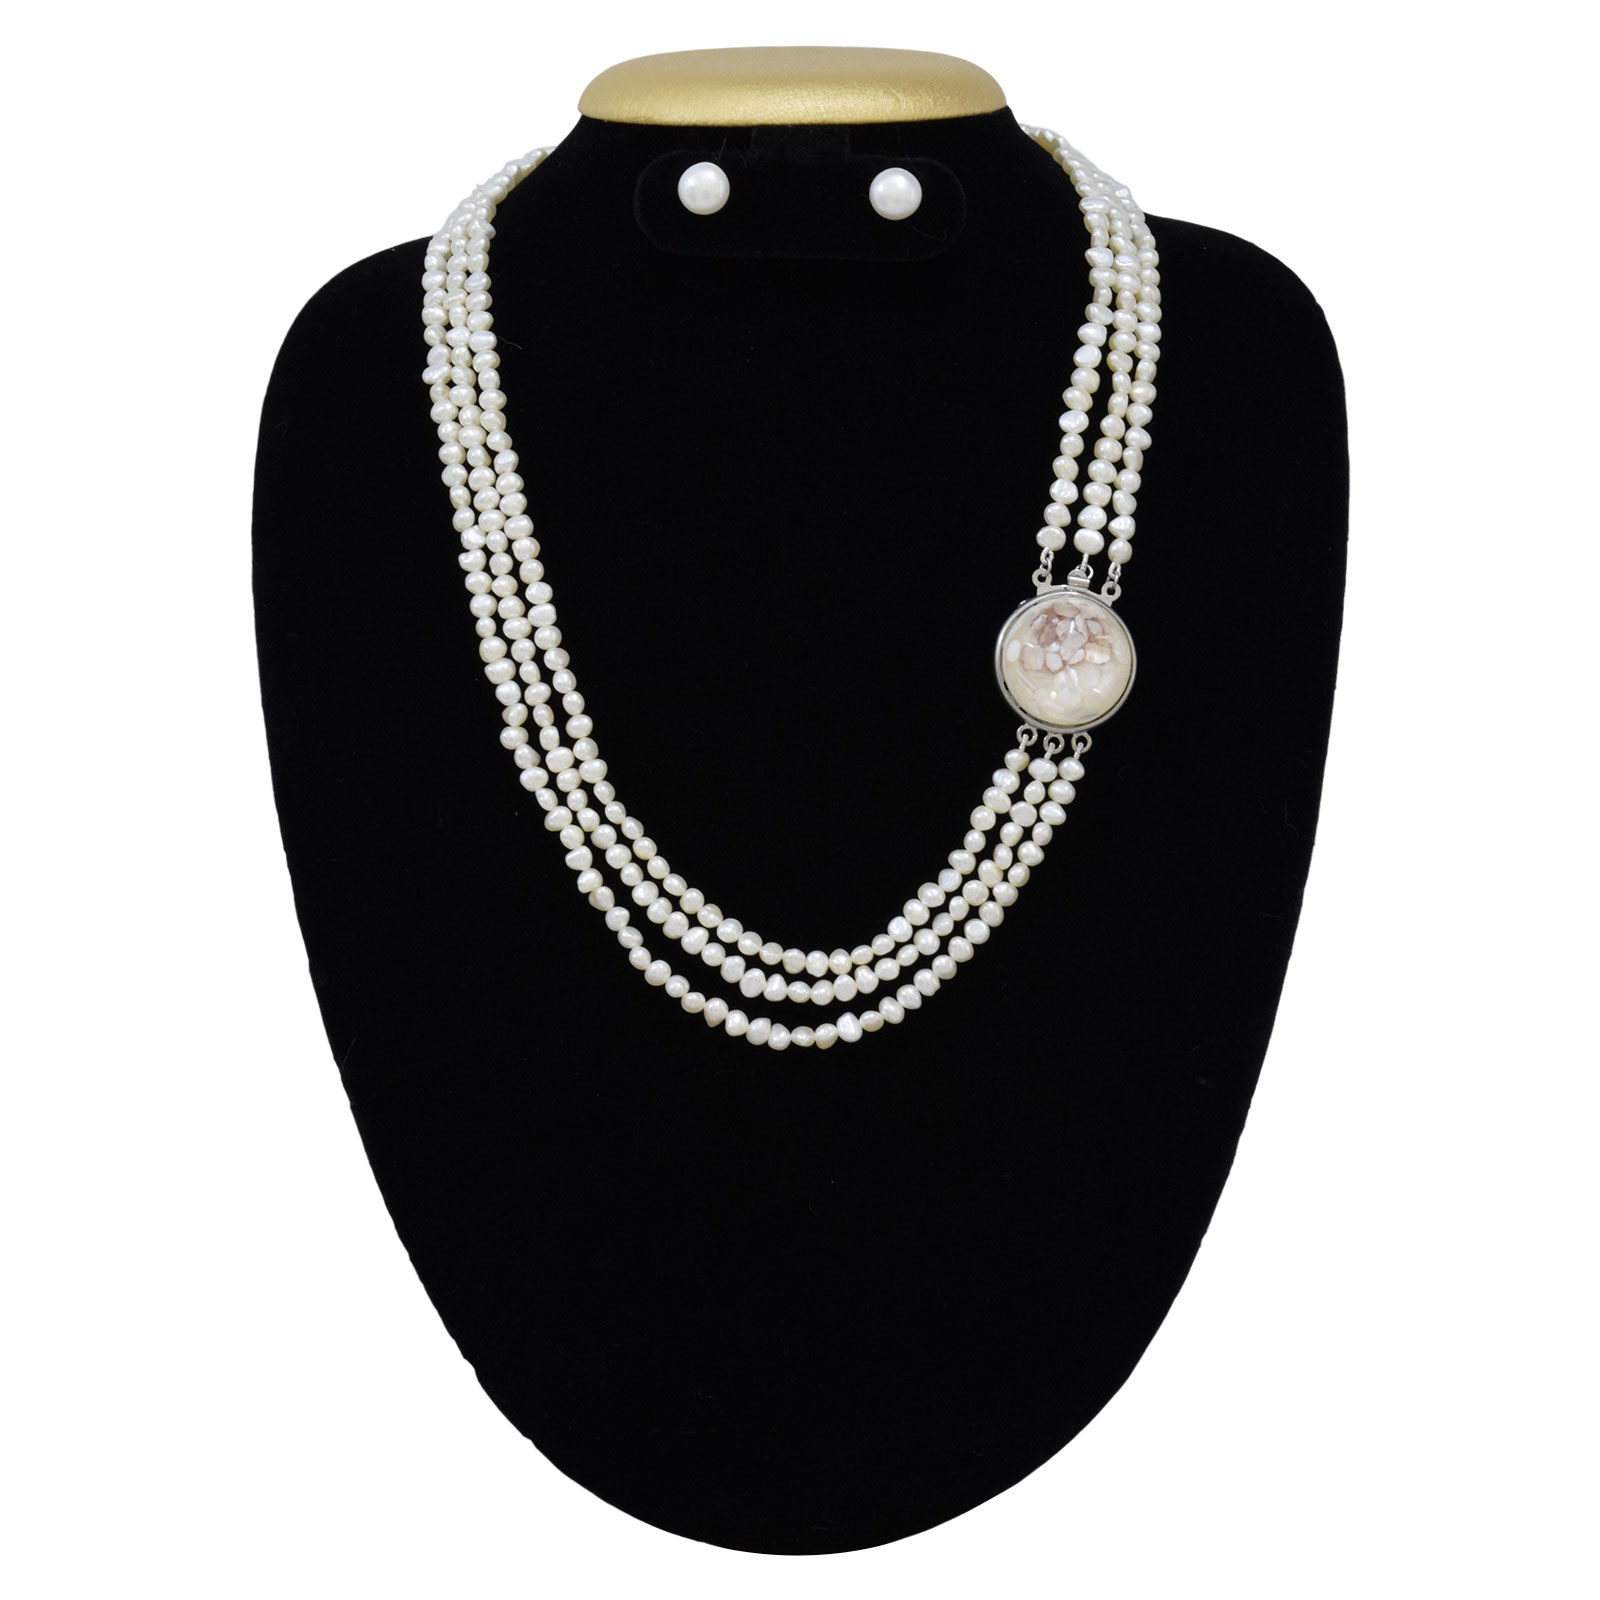 Baroque Pearl Necklace Set with Round Side Pendant